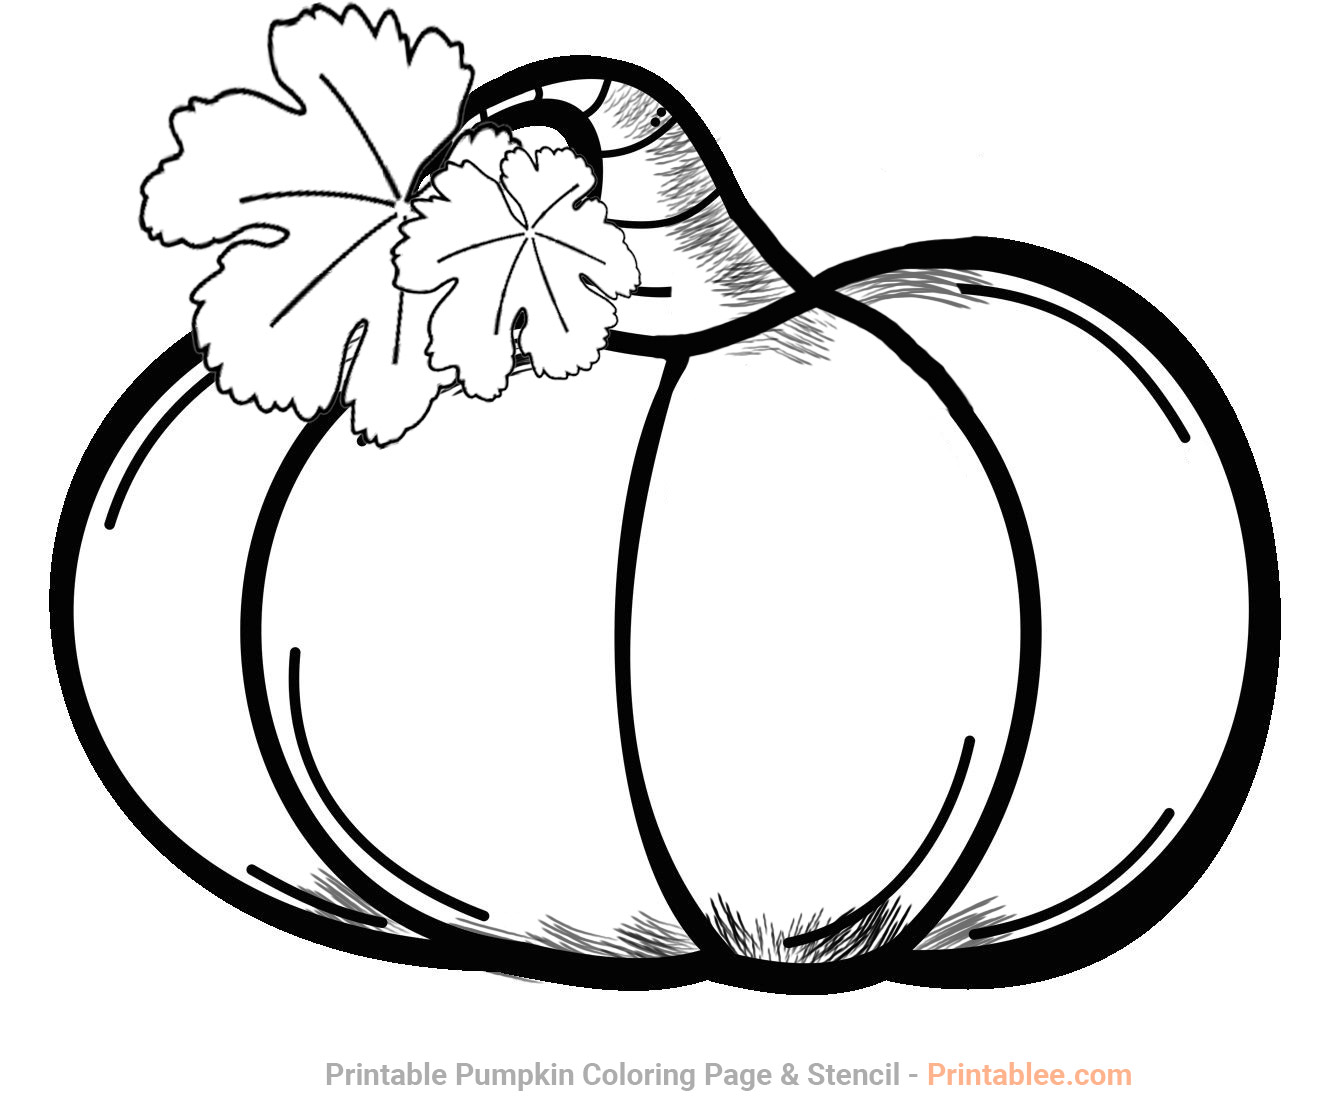 Printable Pumpkin with Leaves Coloring Page - Pumpkin Stencil & Pattern to Cut